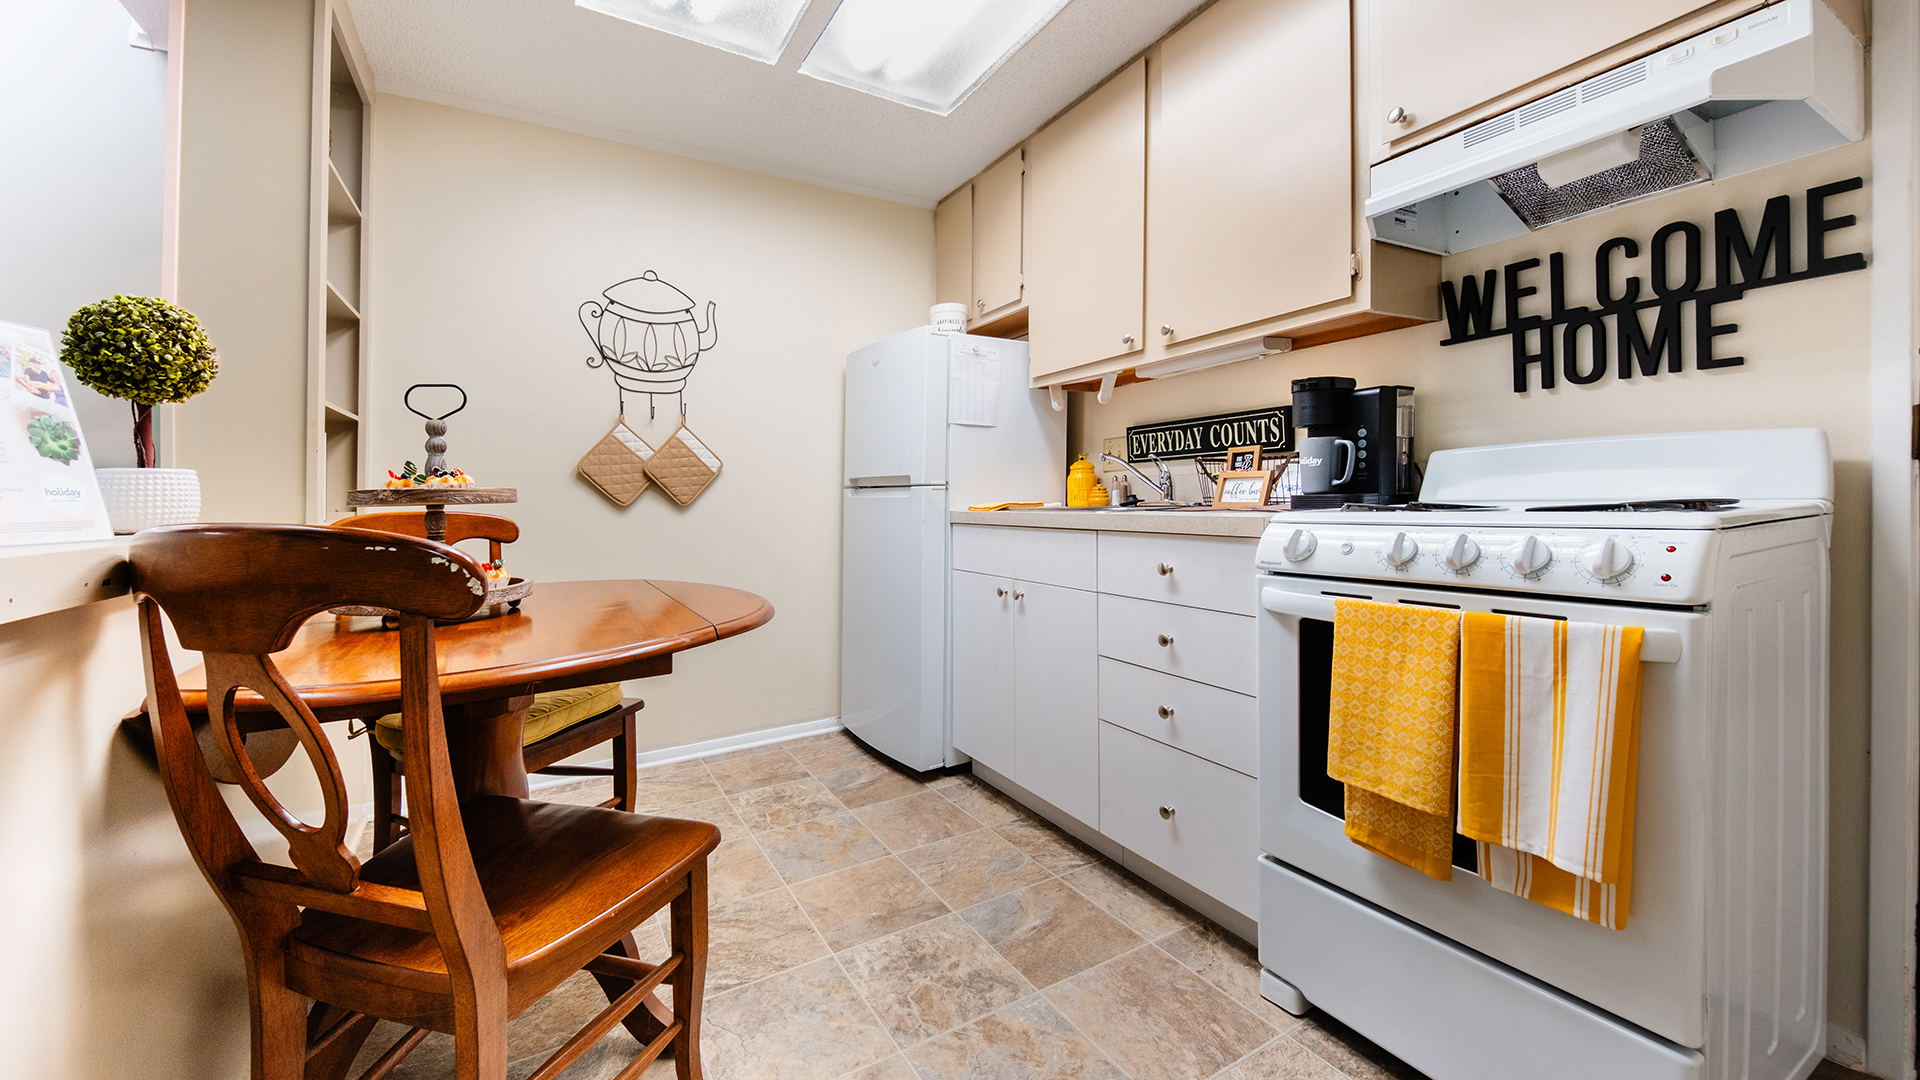 Apartment kitchen with yellow towels and accents